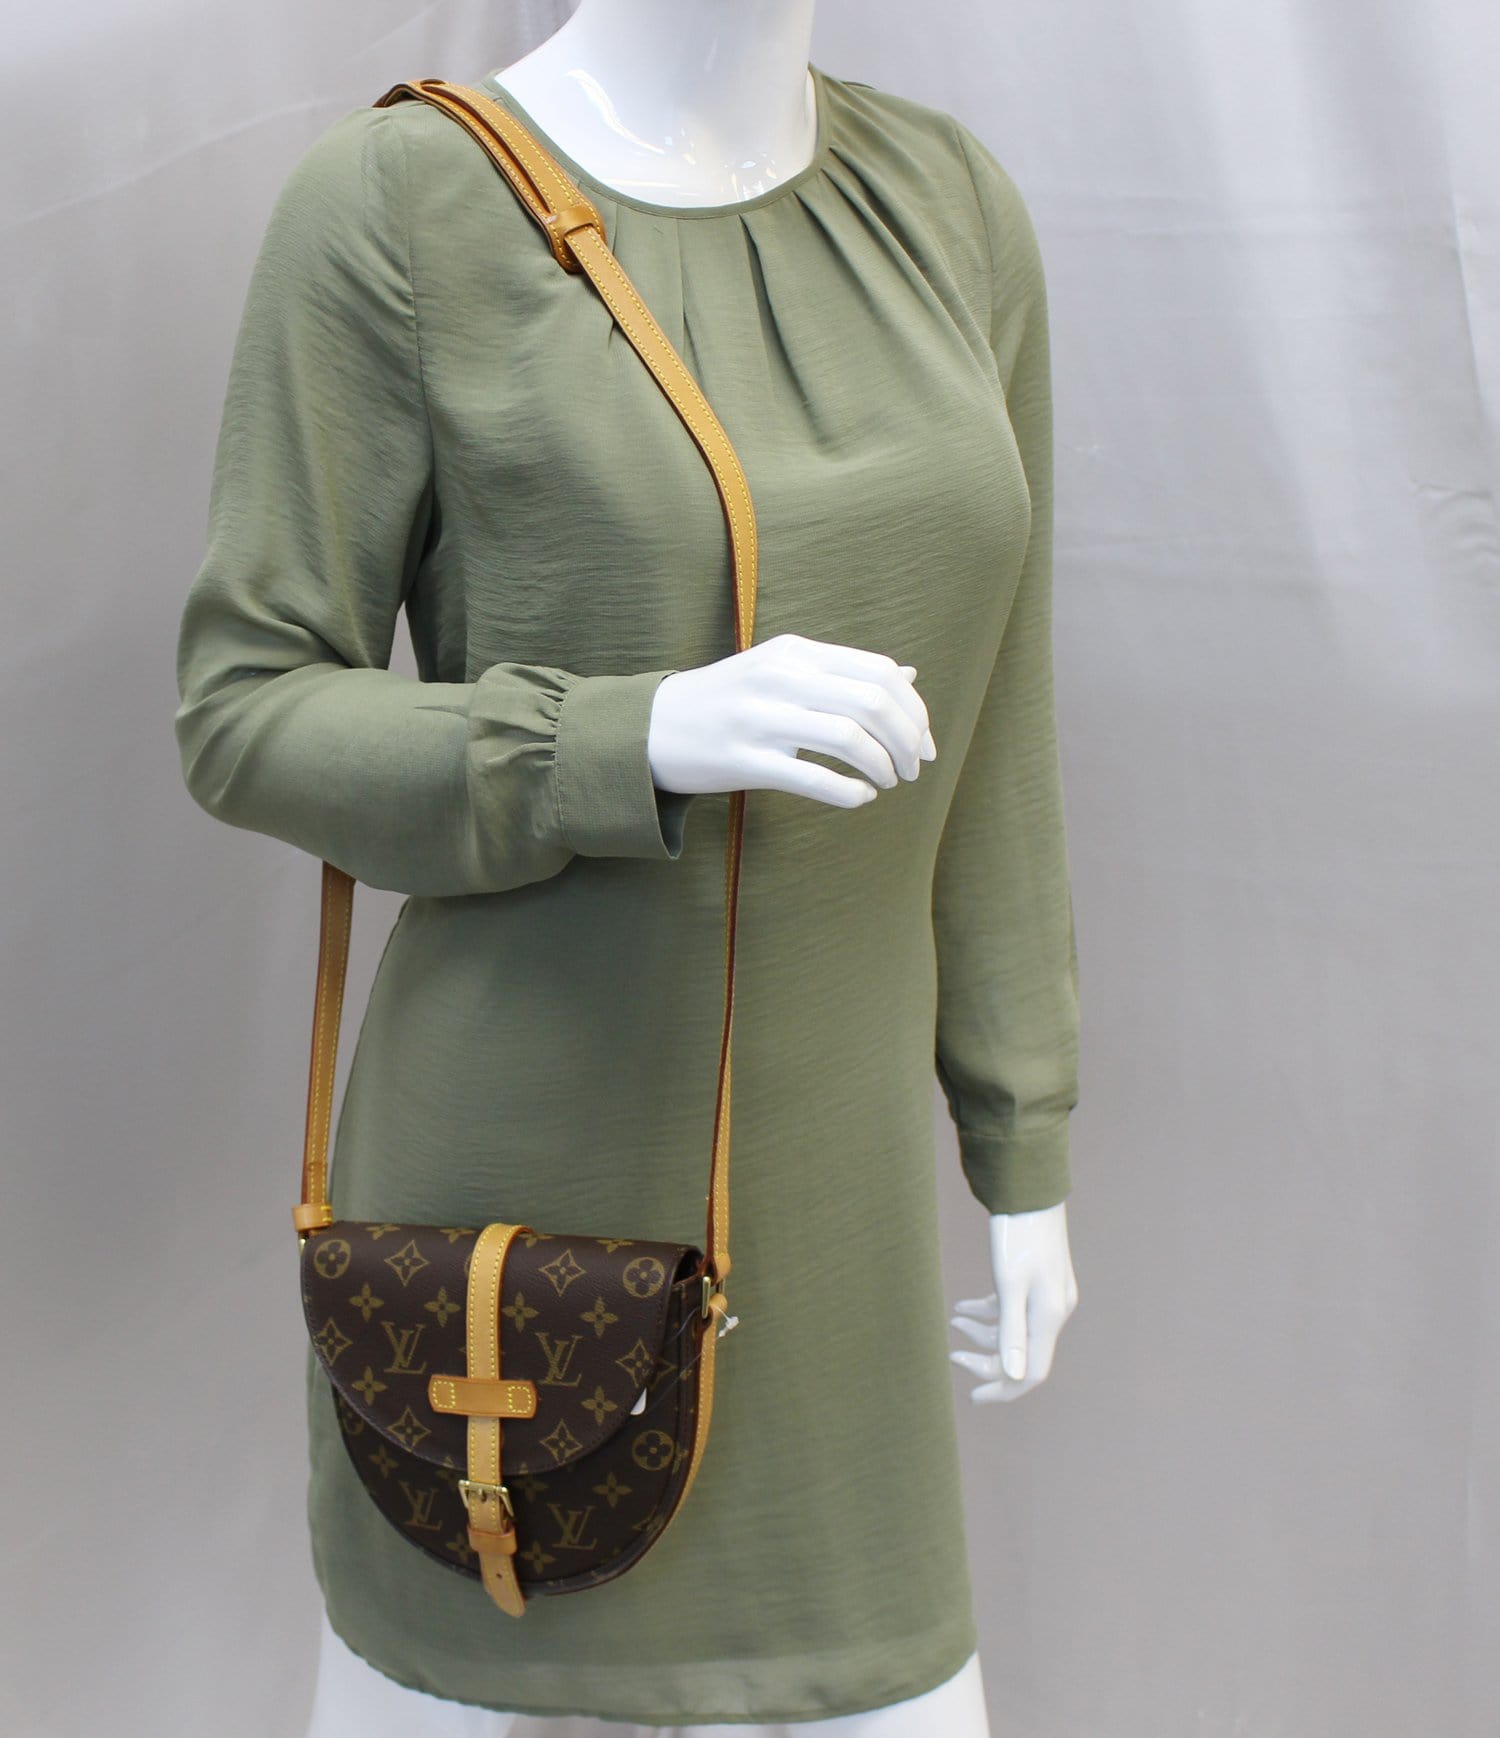 Vintage 1990s Louis Vuitton Canvas Chantilly Crossbody Bag – Perry's Jewelry